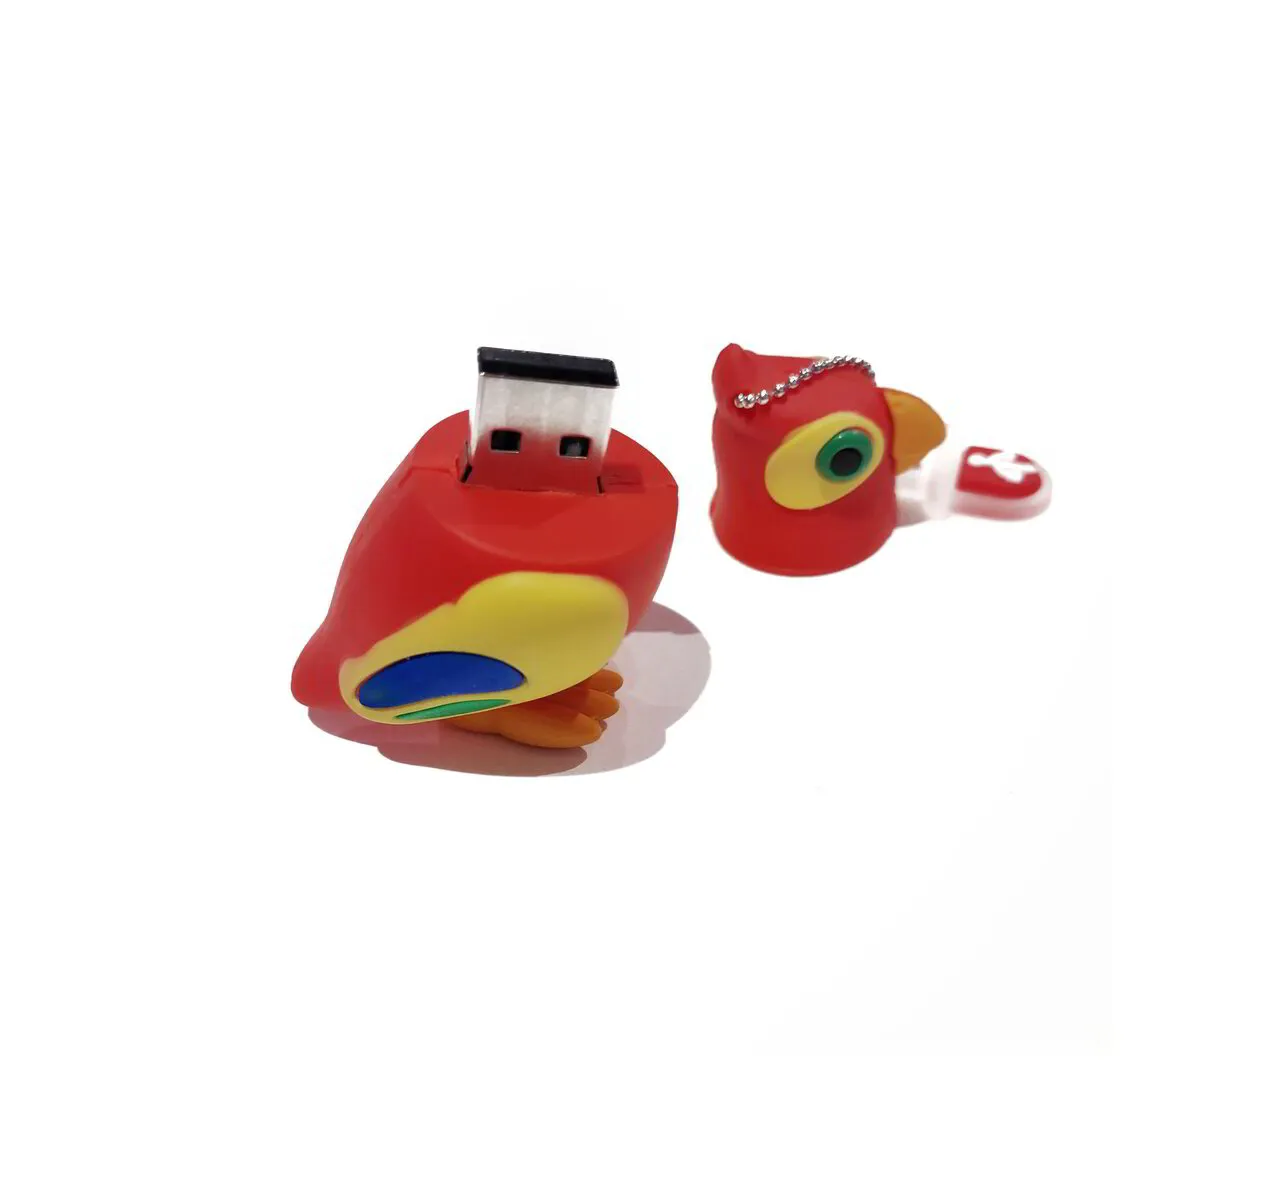 Coral Island Adventures All Episodes on USB Flash Drive Macaw Parrot